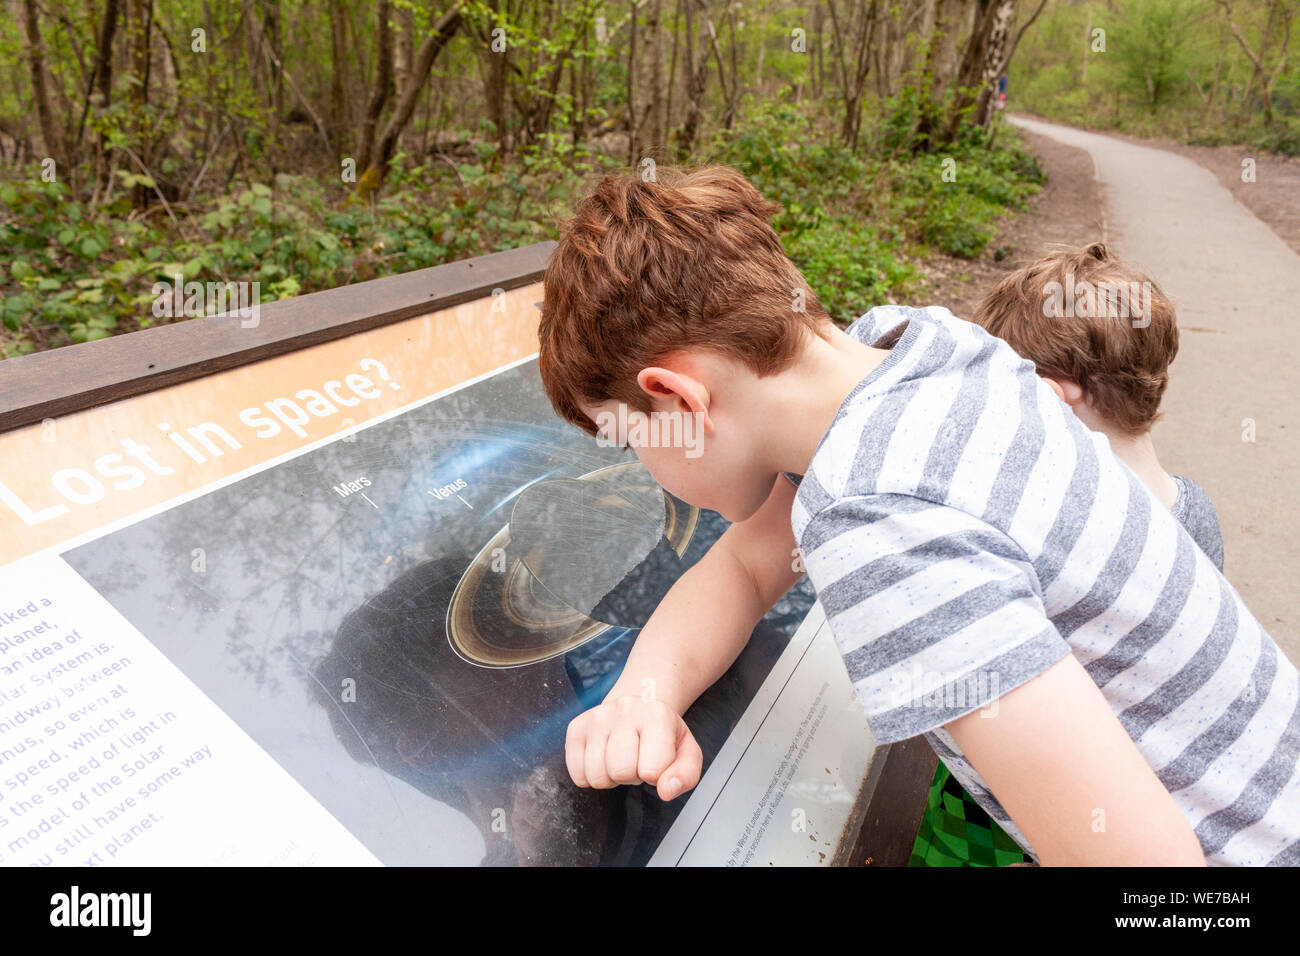 A boy looking at and reading a board about the solar system at Ruislip Lido, Greater London Stock Photo